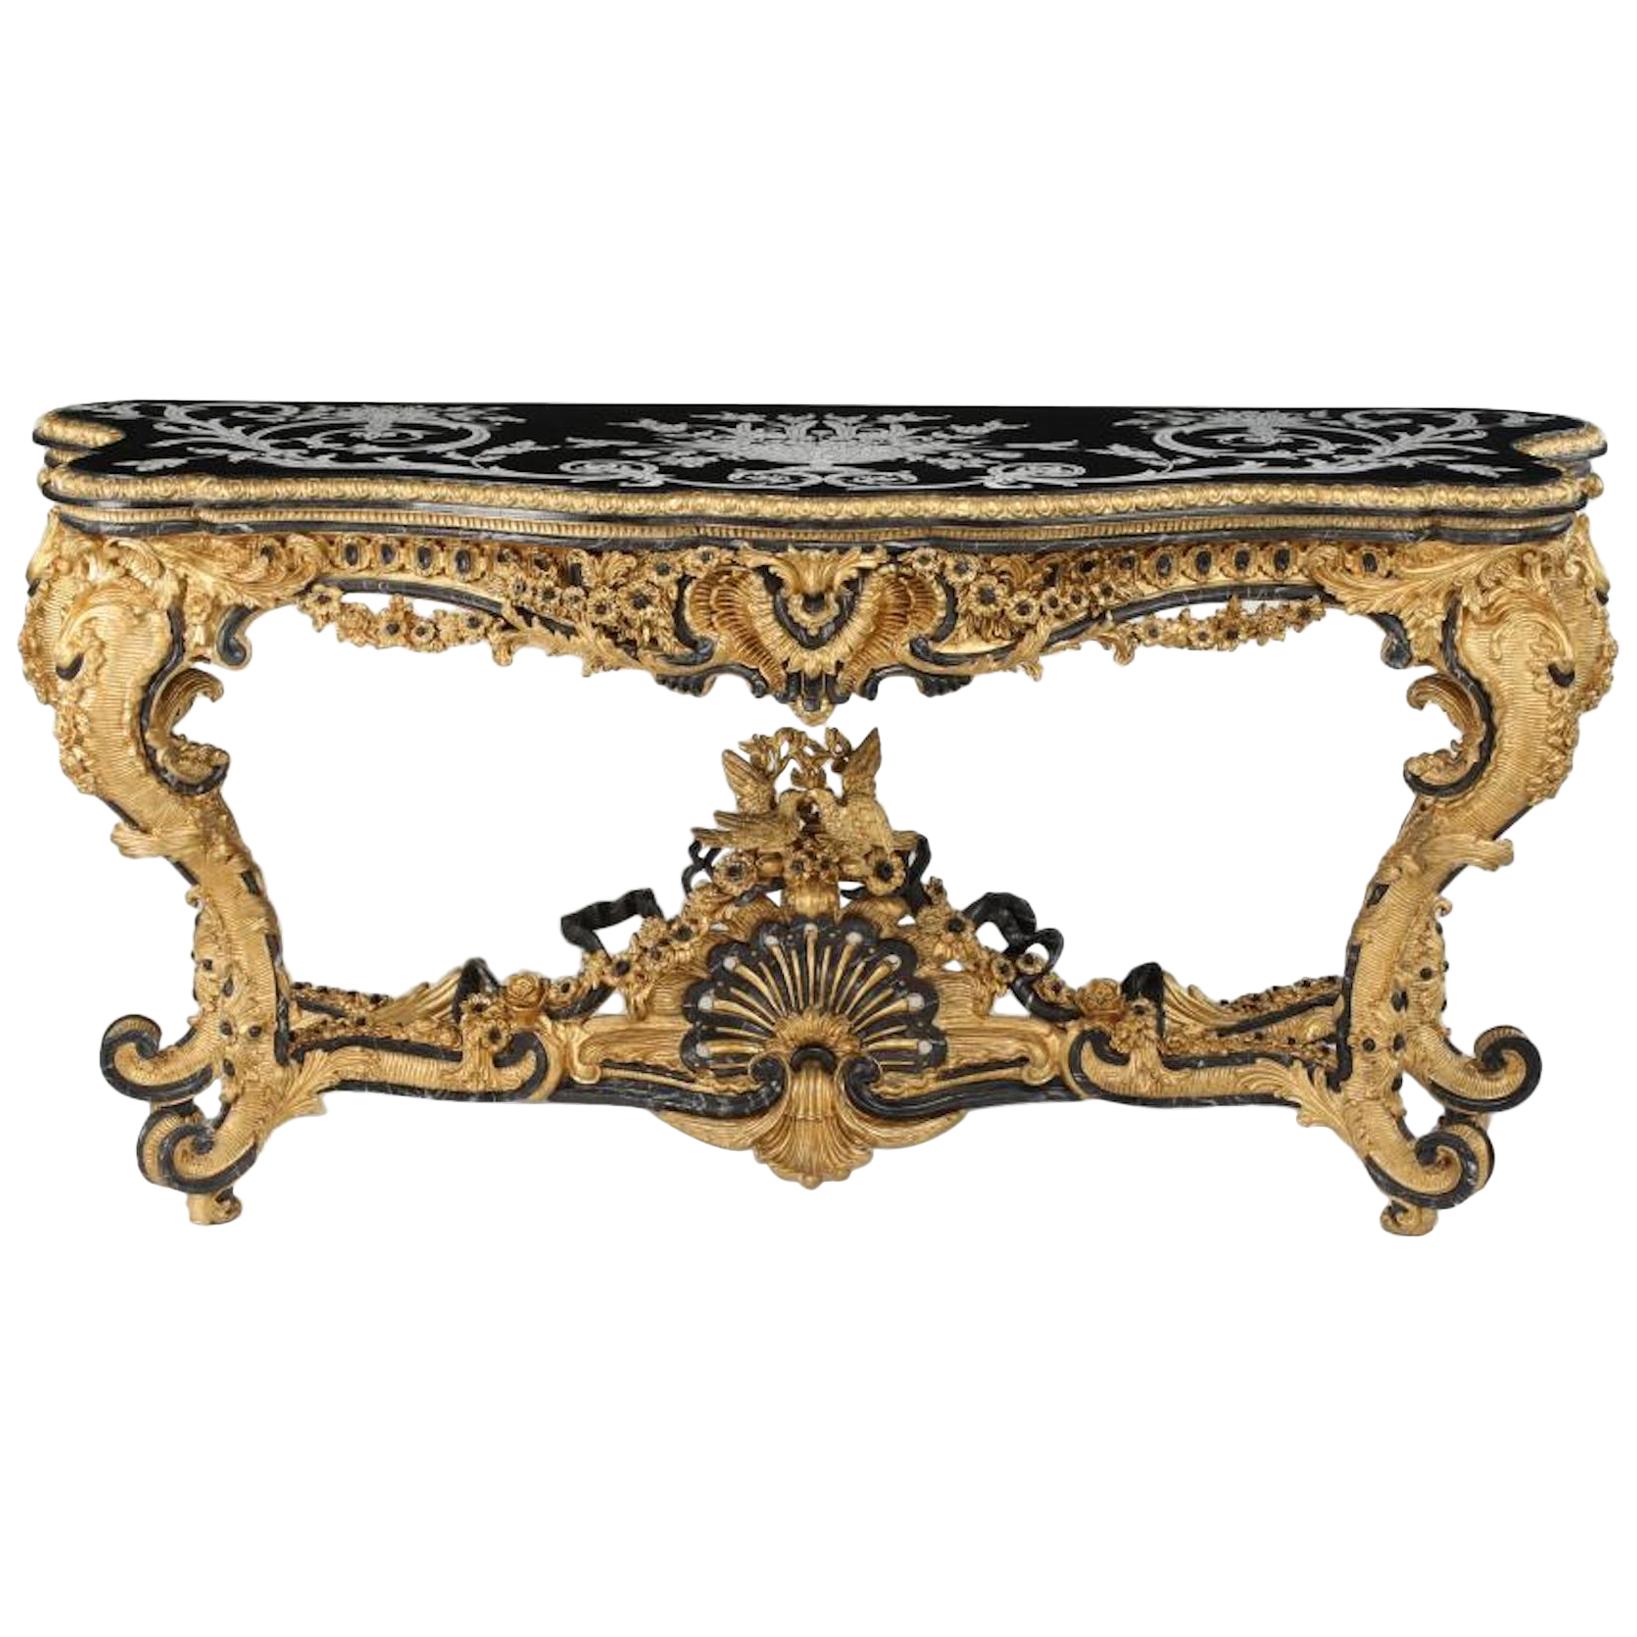 Carved Gilt Italian Rococo Style Marble-Top Console For Sale